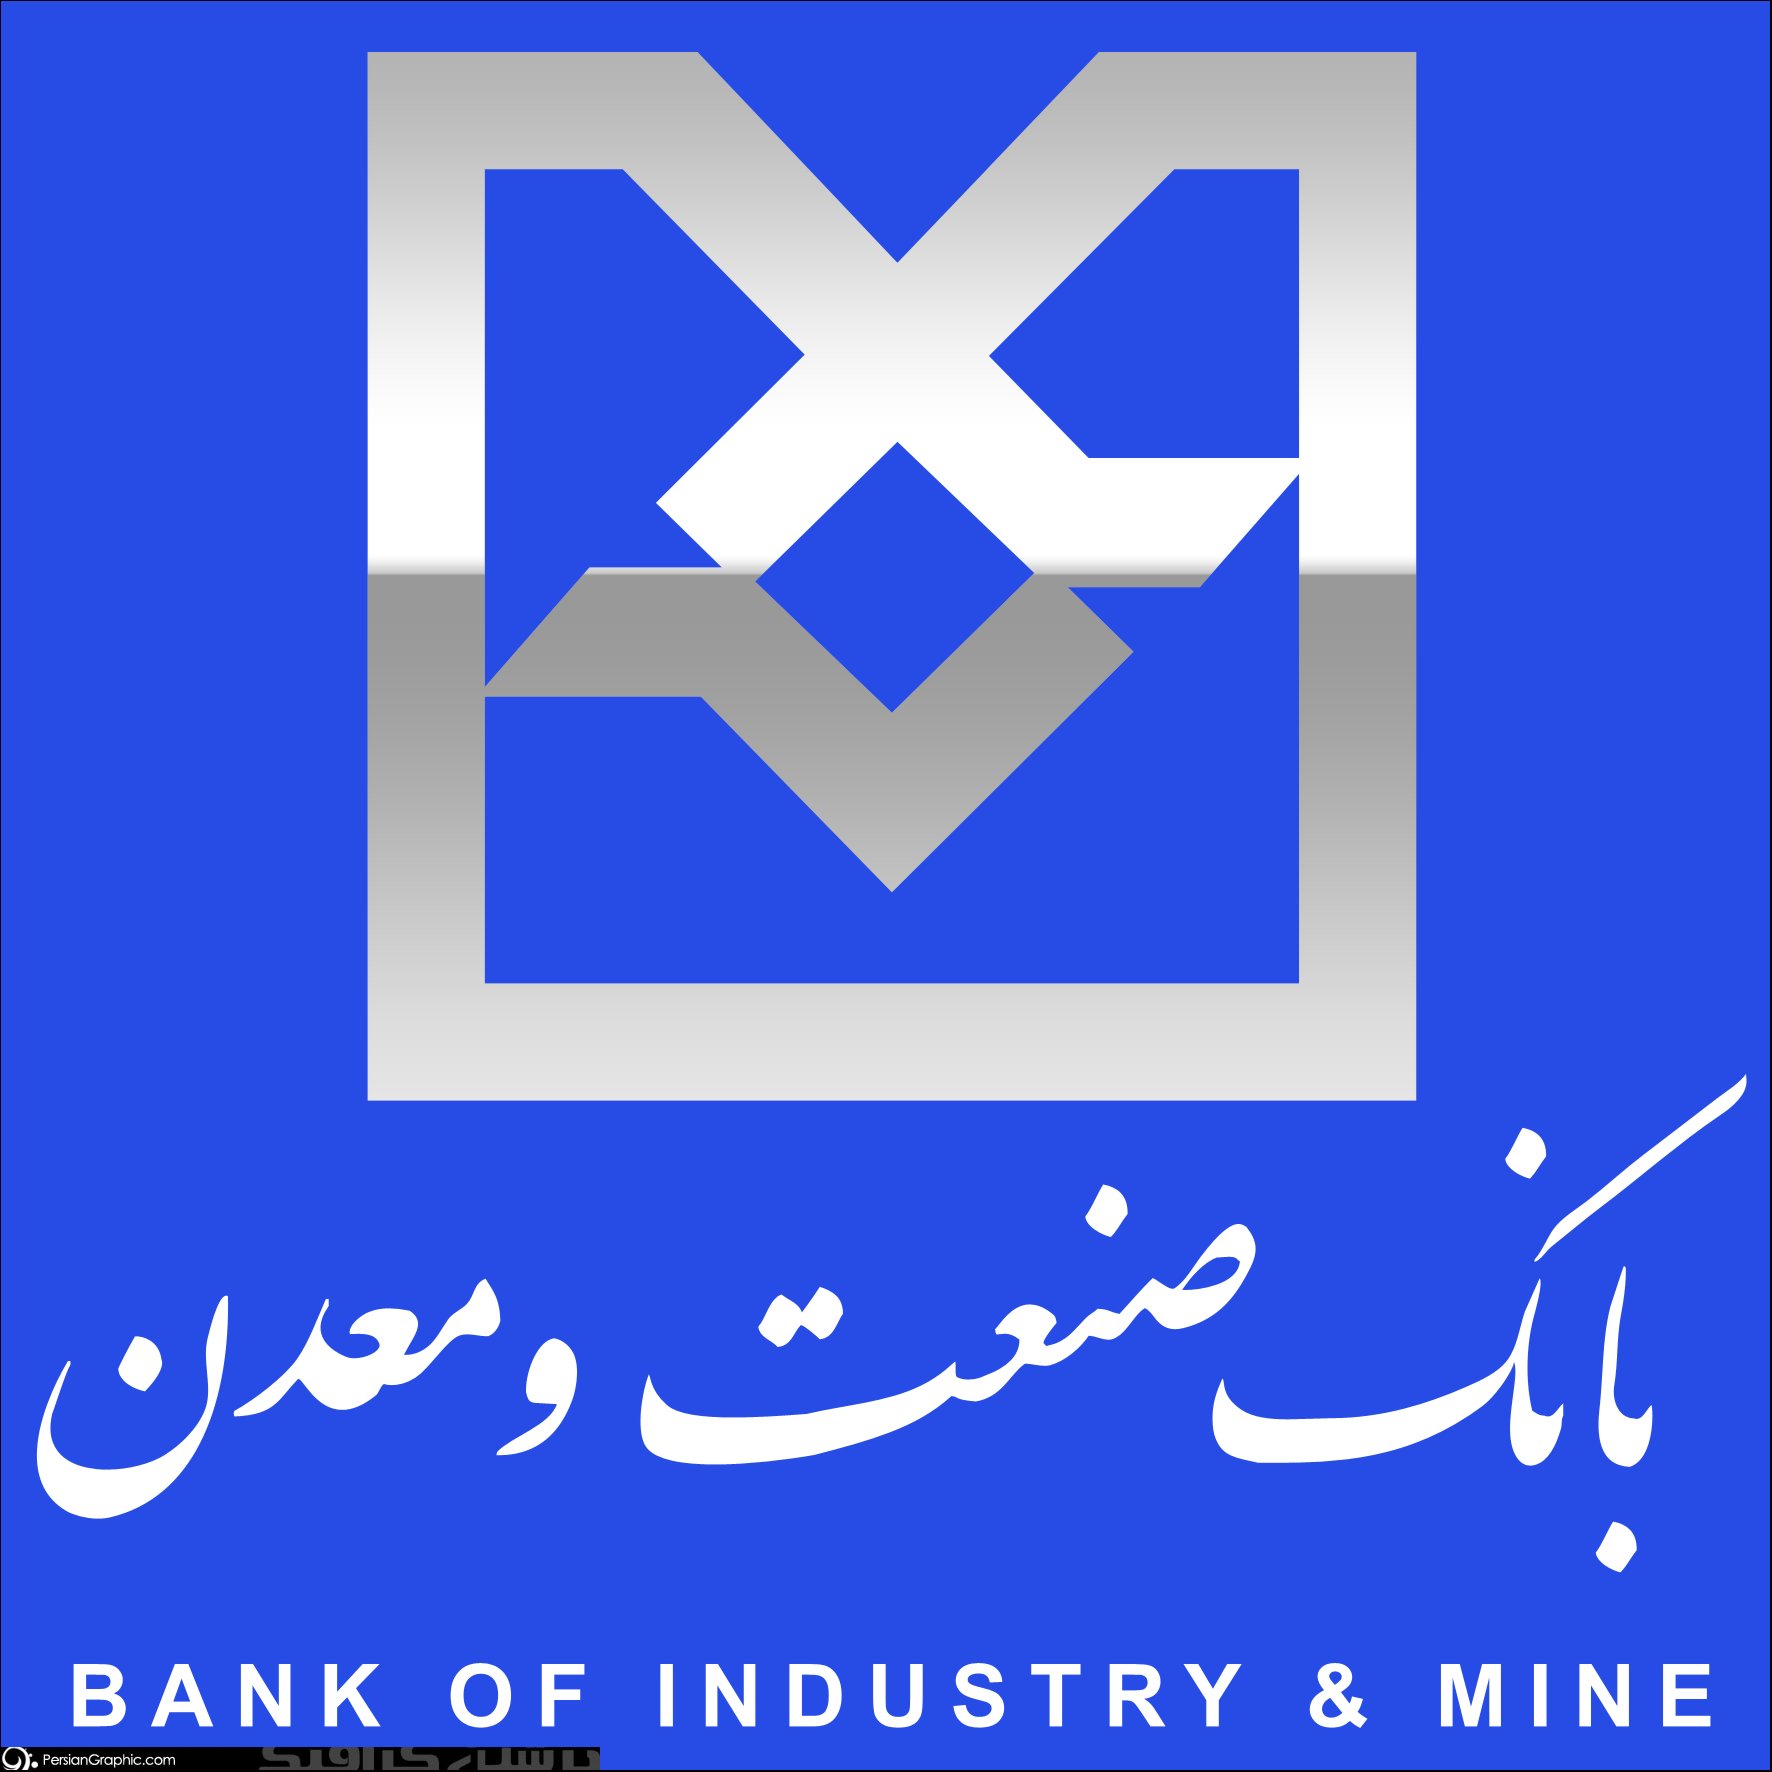 Operation of 2 industrial projects in West Azarbaijan province with facilities of Bank of Industry and Mine